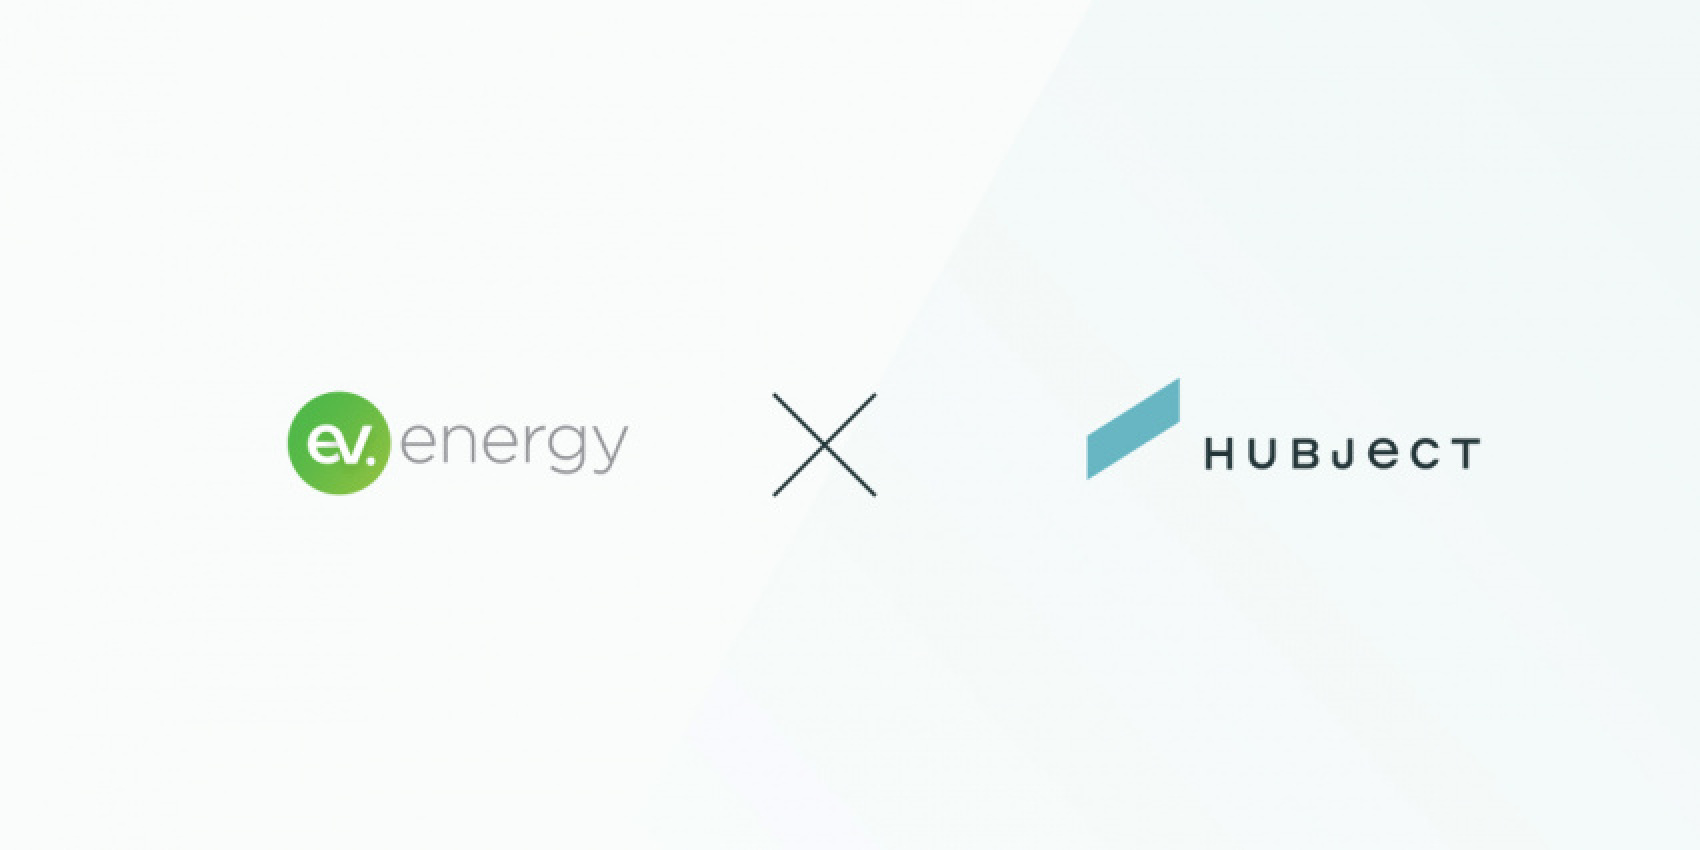 autos, cars, electric vehicle, energy & infrastructure, data, ev.energy, germany, hubject, smart charging, hubject & ev.energy strike data sharing deal